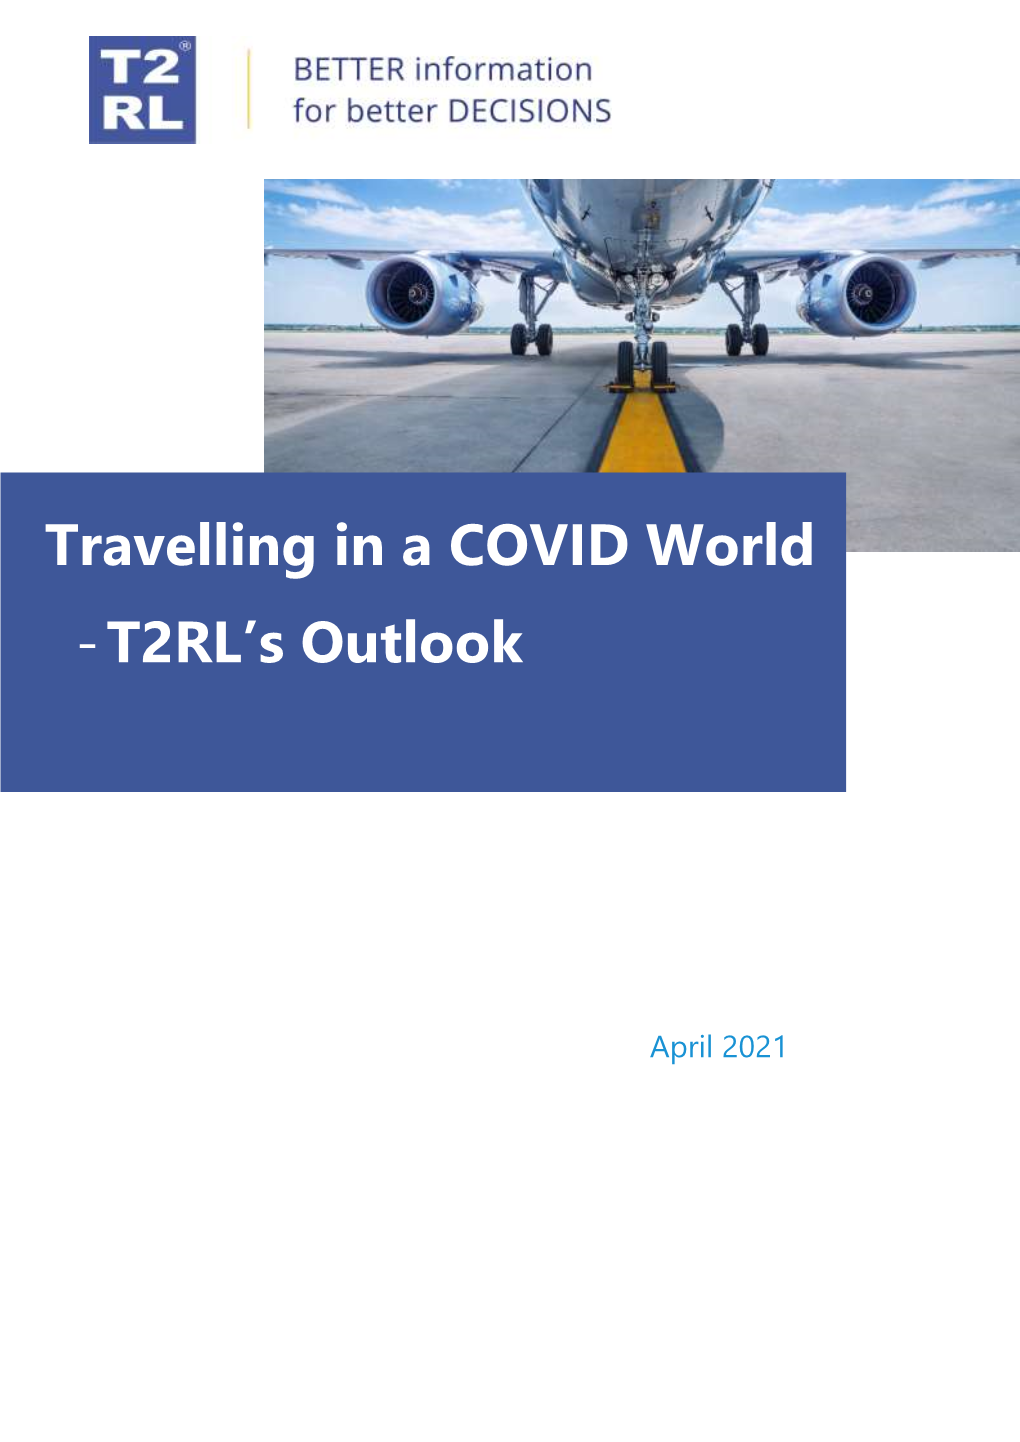 Travelling in a COVID World - T2RL’S Outlook